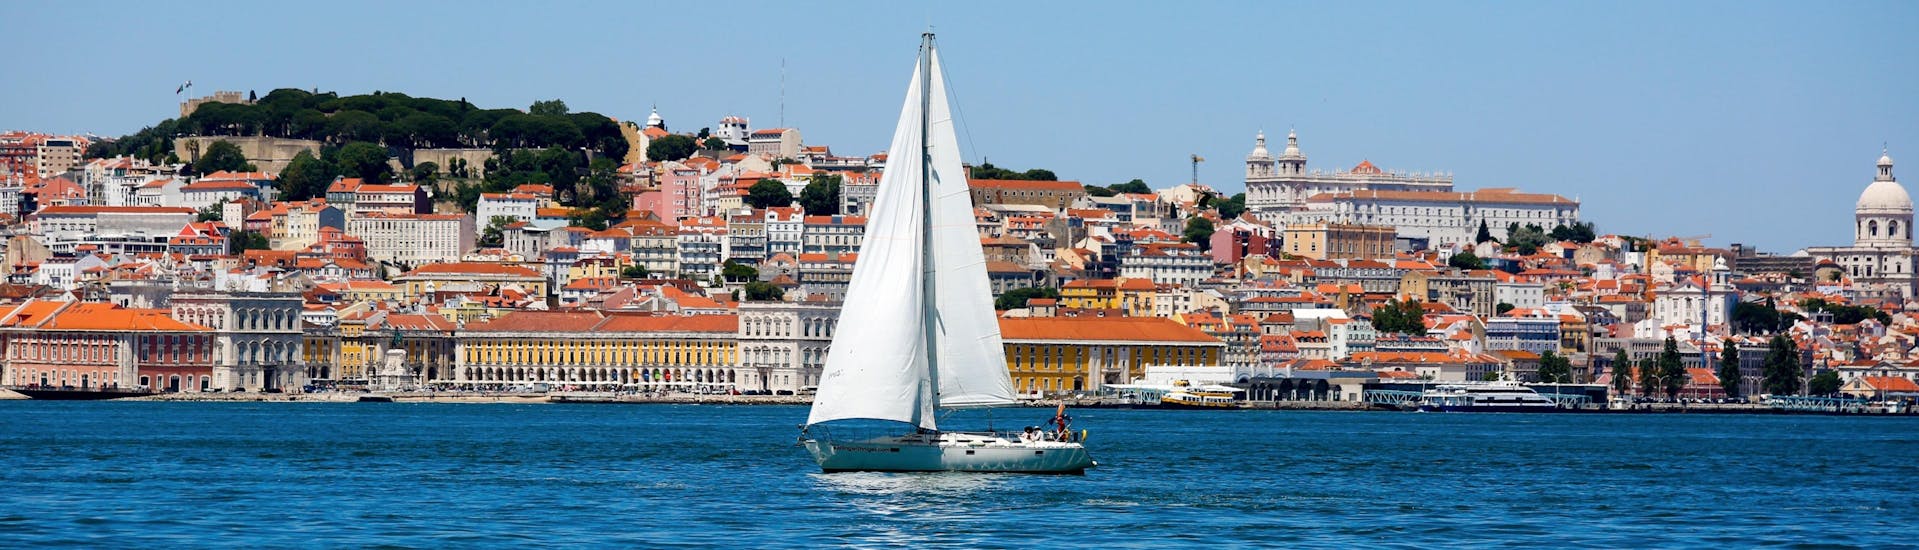 An image of a sailing boat drifting along the Tagus River during a boat trip in the Lisbon metropolitan area.